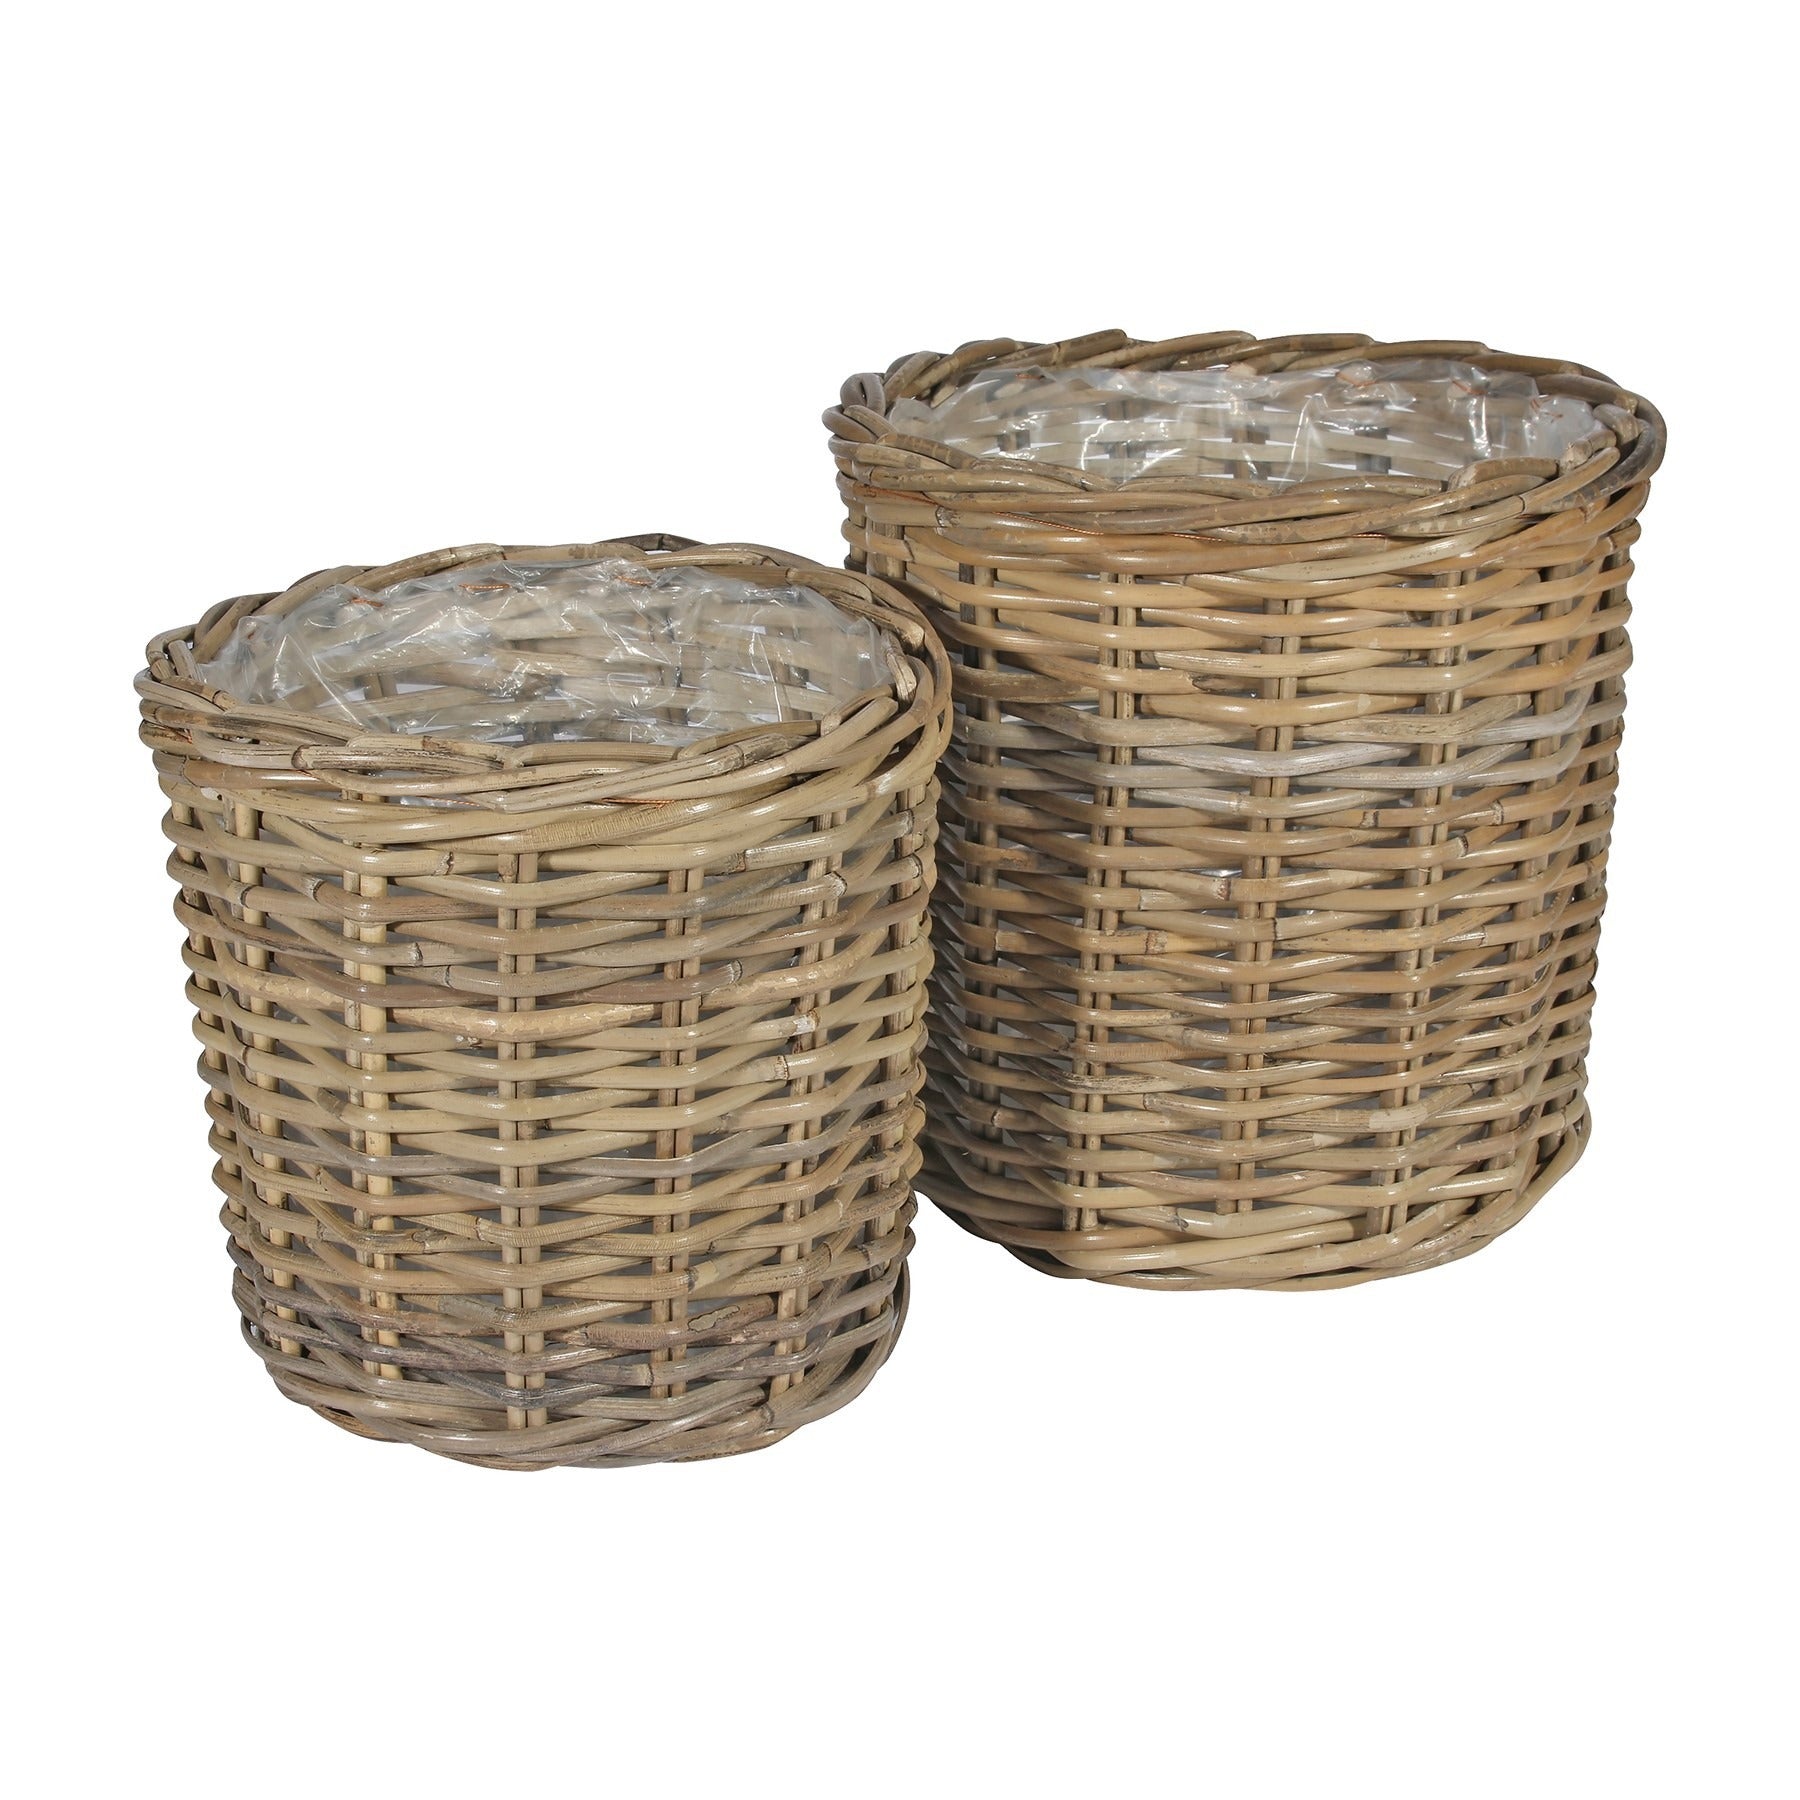 View Set of 2 Round Baskets with Liners information